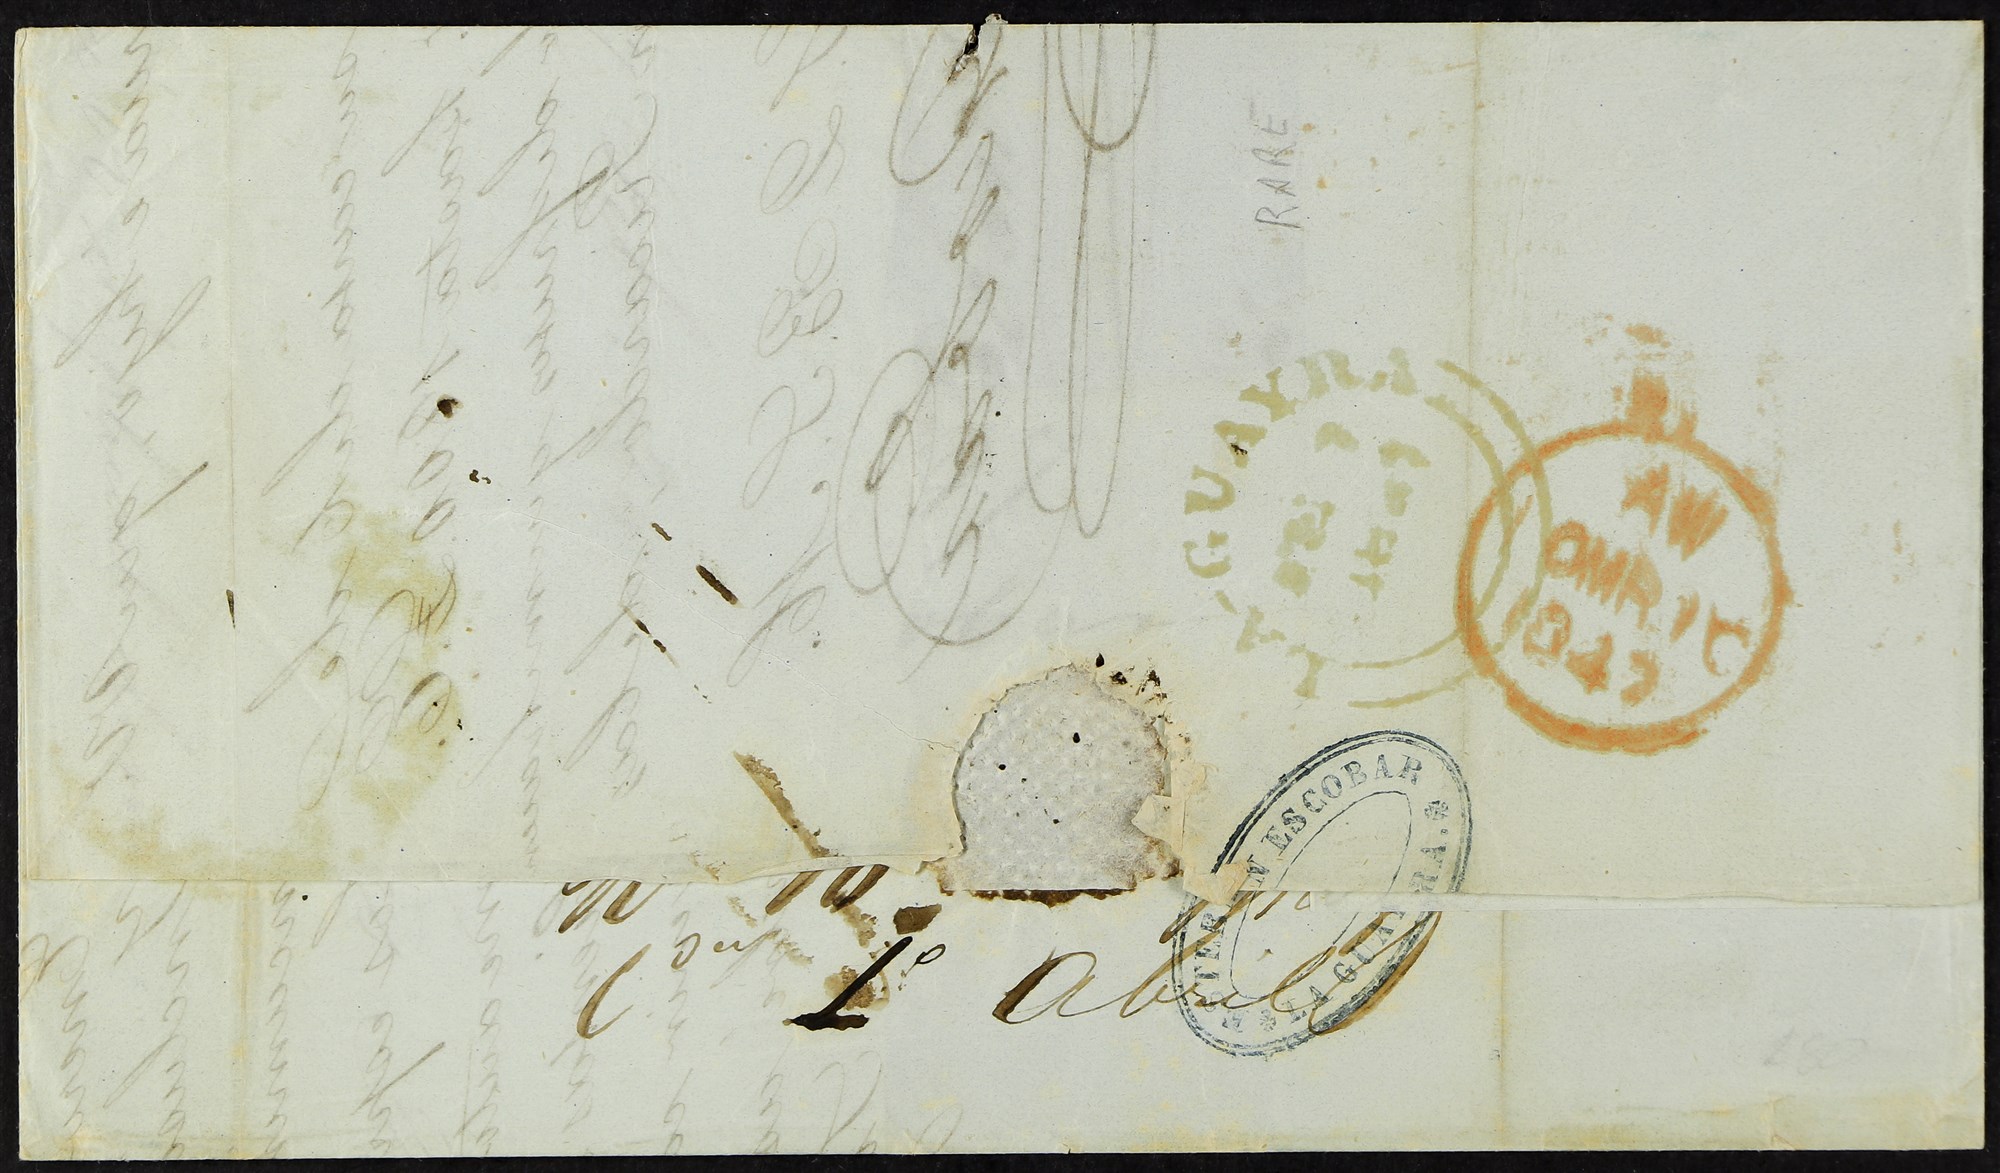 VENEZUELA BRITISH POST OFFICE AT LA GUAYRA 1847 (Feb) single sheet letter written in French to